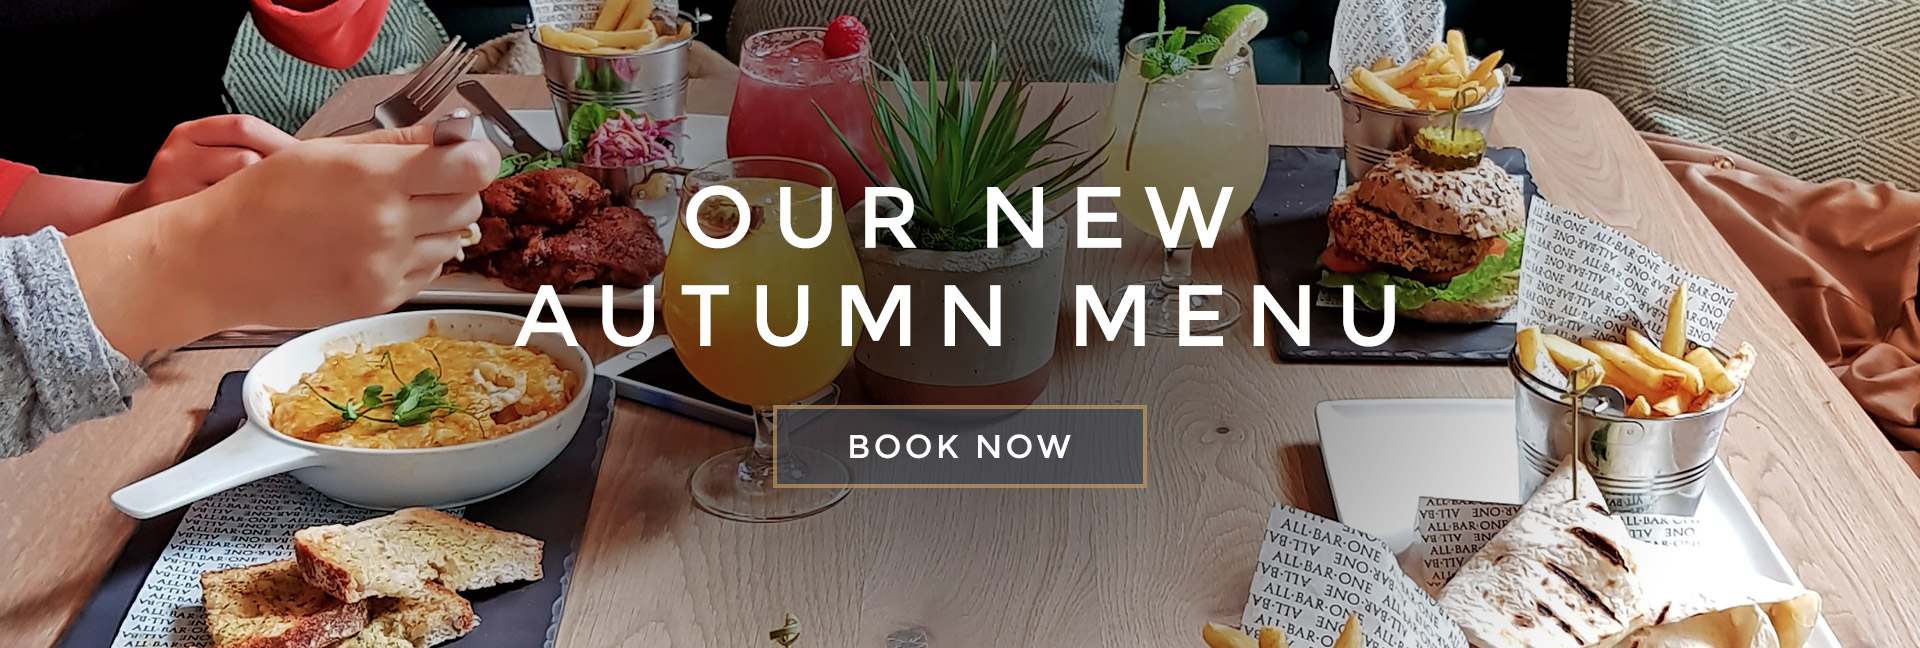 Our new Autumn menu at All Bar One Cannon Street - Book now